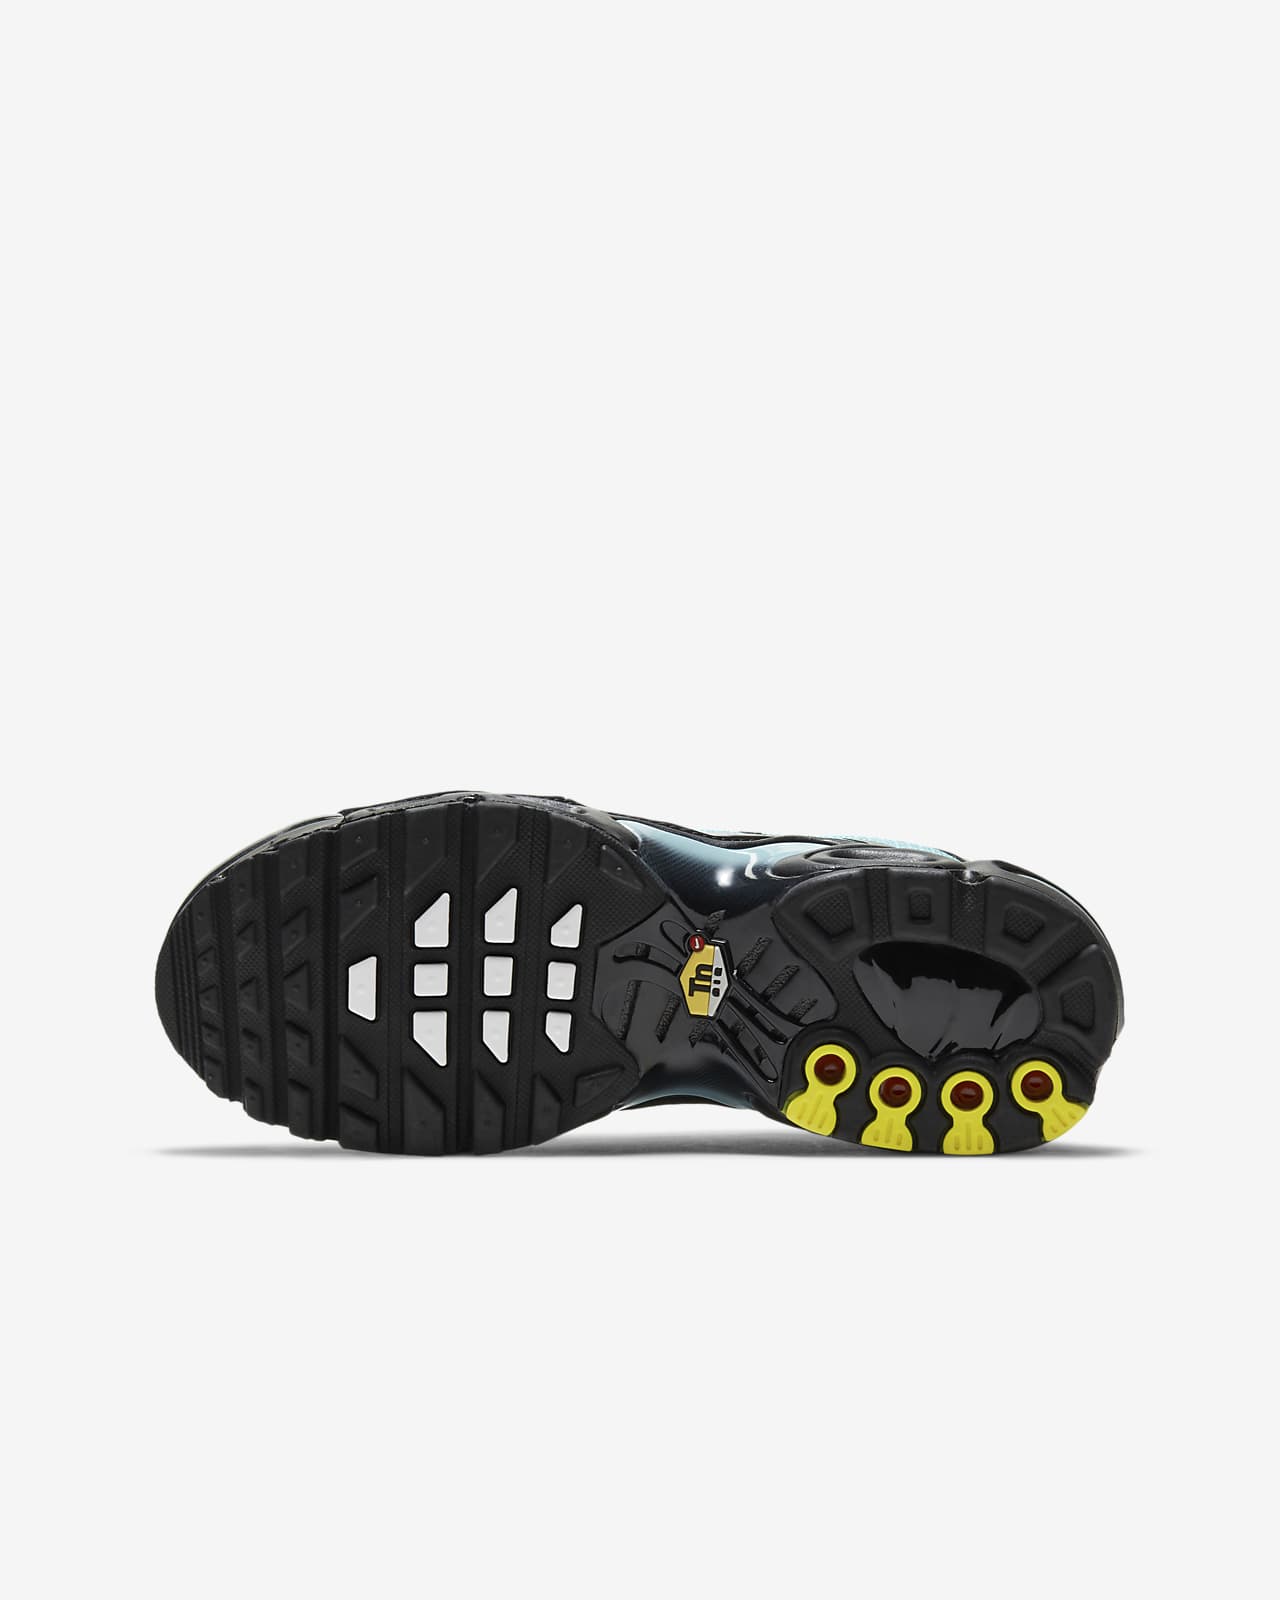 nike air max plus true to size